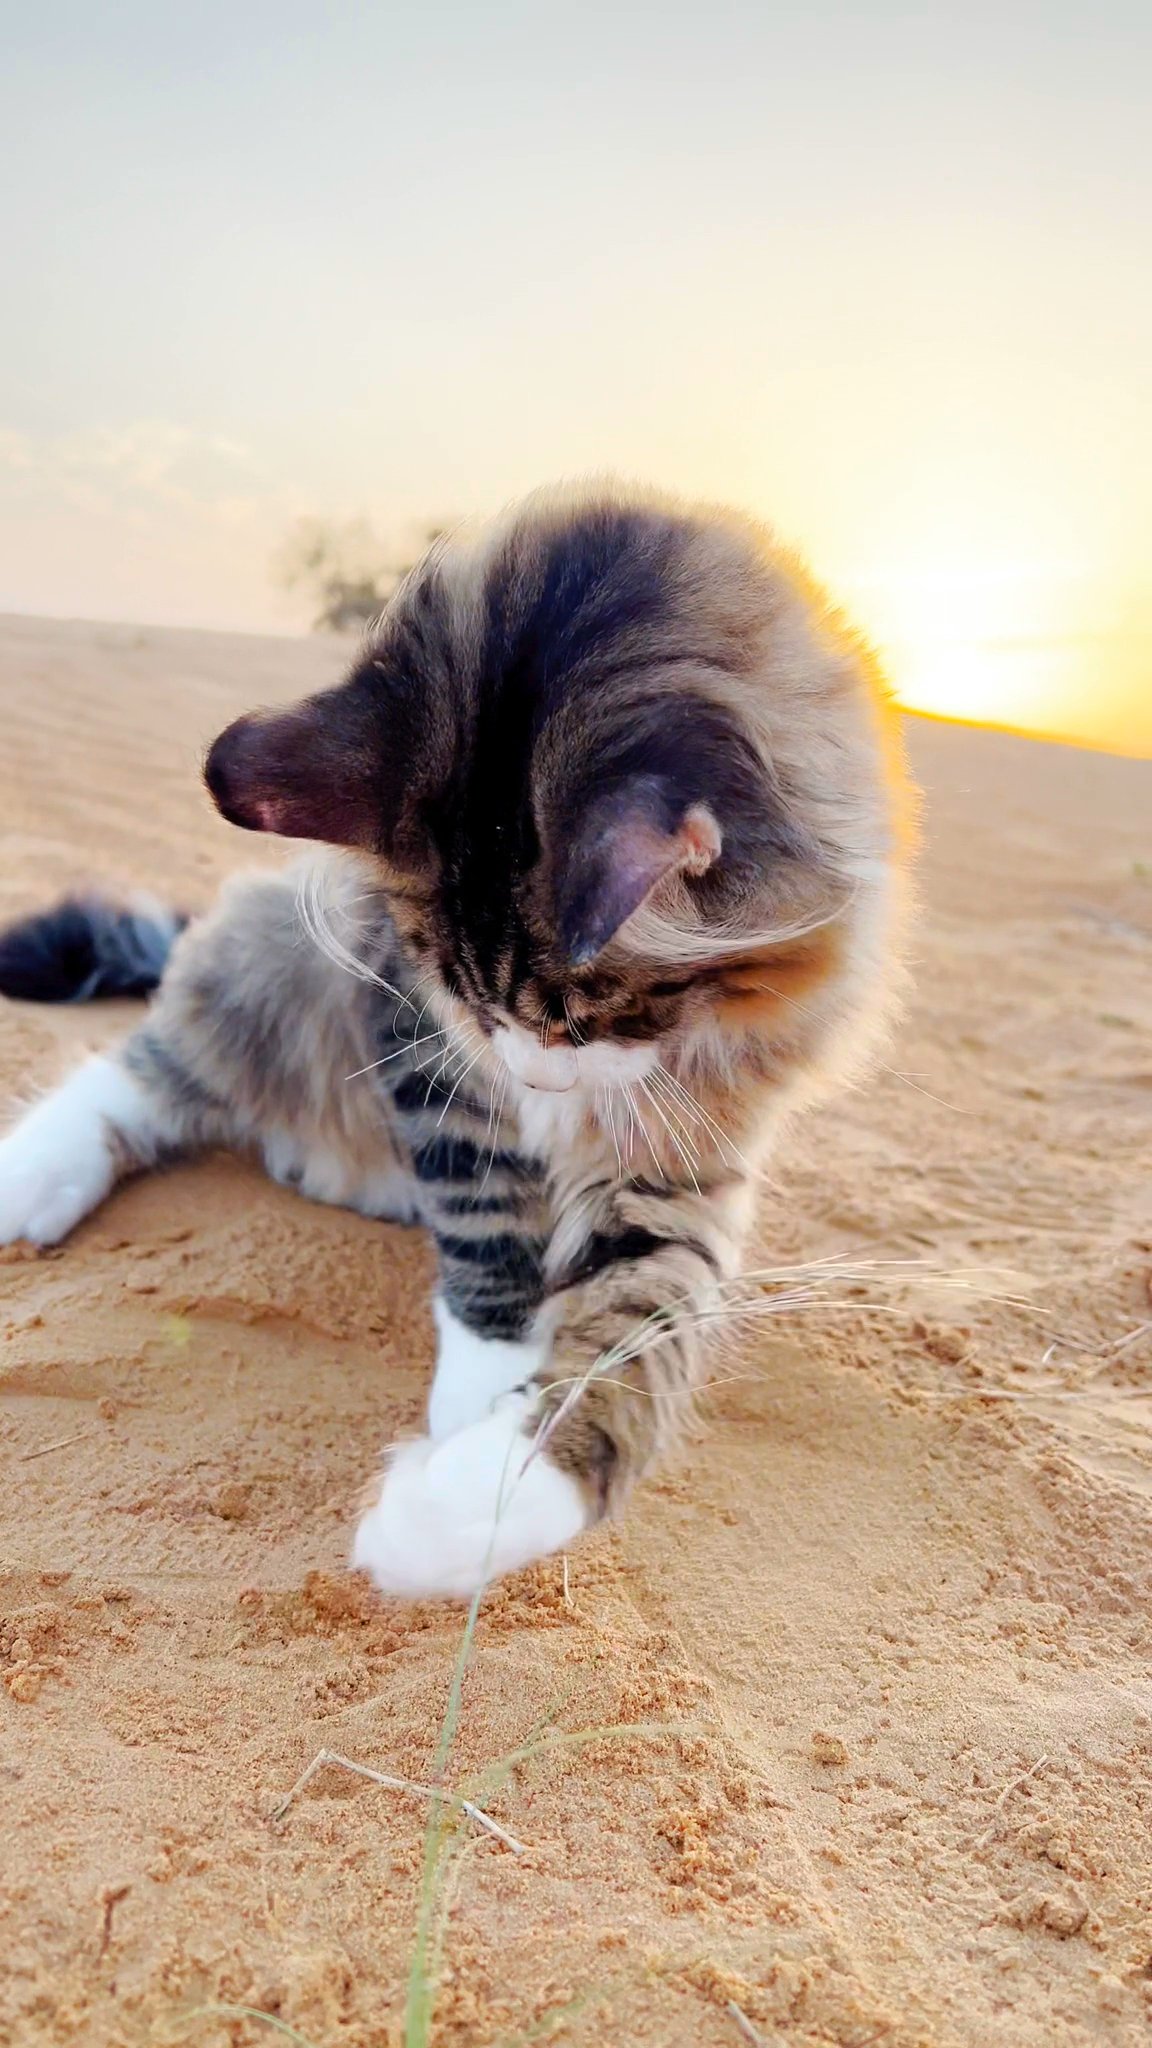 6 months old Maine coon pure breed with pedigree in Dubai